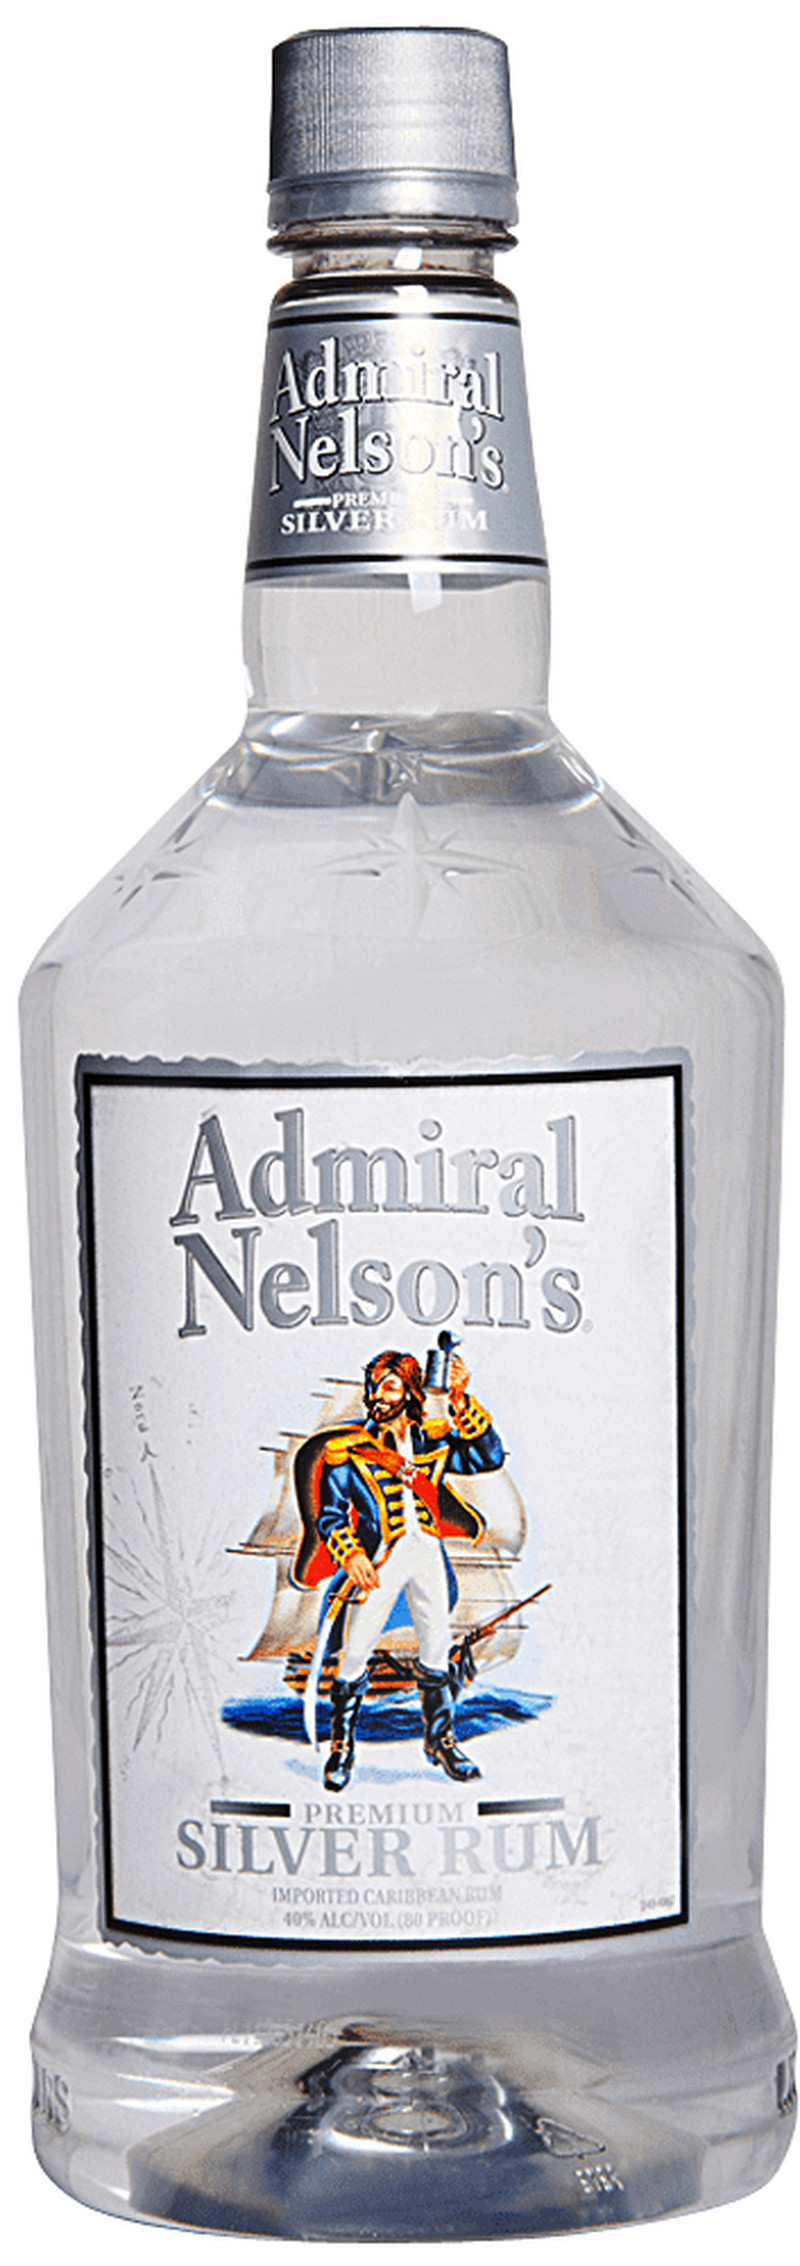 ADMIRAL NELSON'S SILVER RUM 1.75L